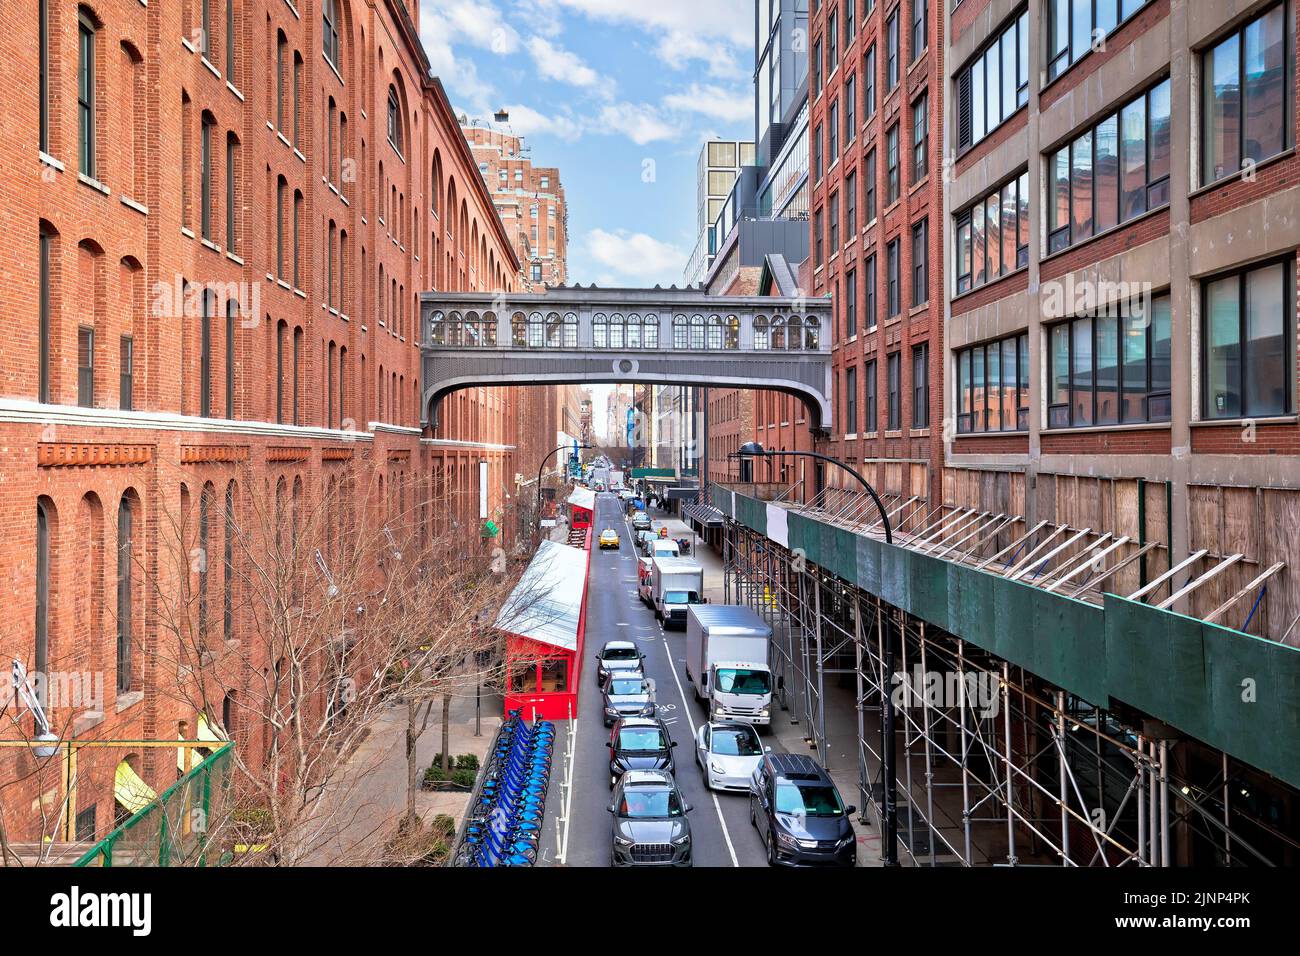 New York City W15th street Chelsea Market view, Meatpacking district NYC, United States of America Stock Photo